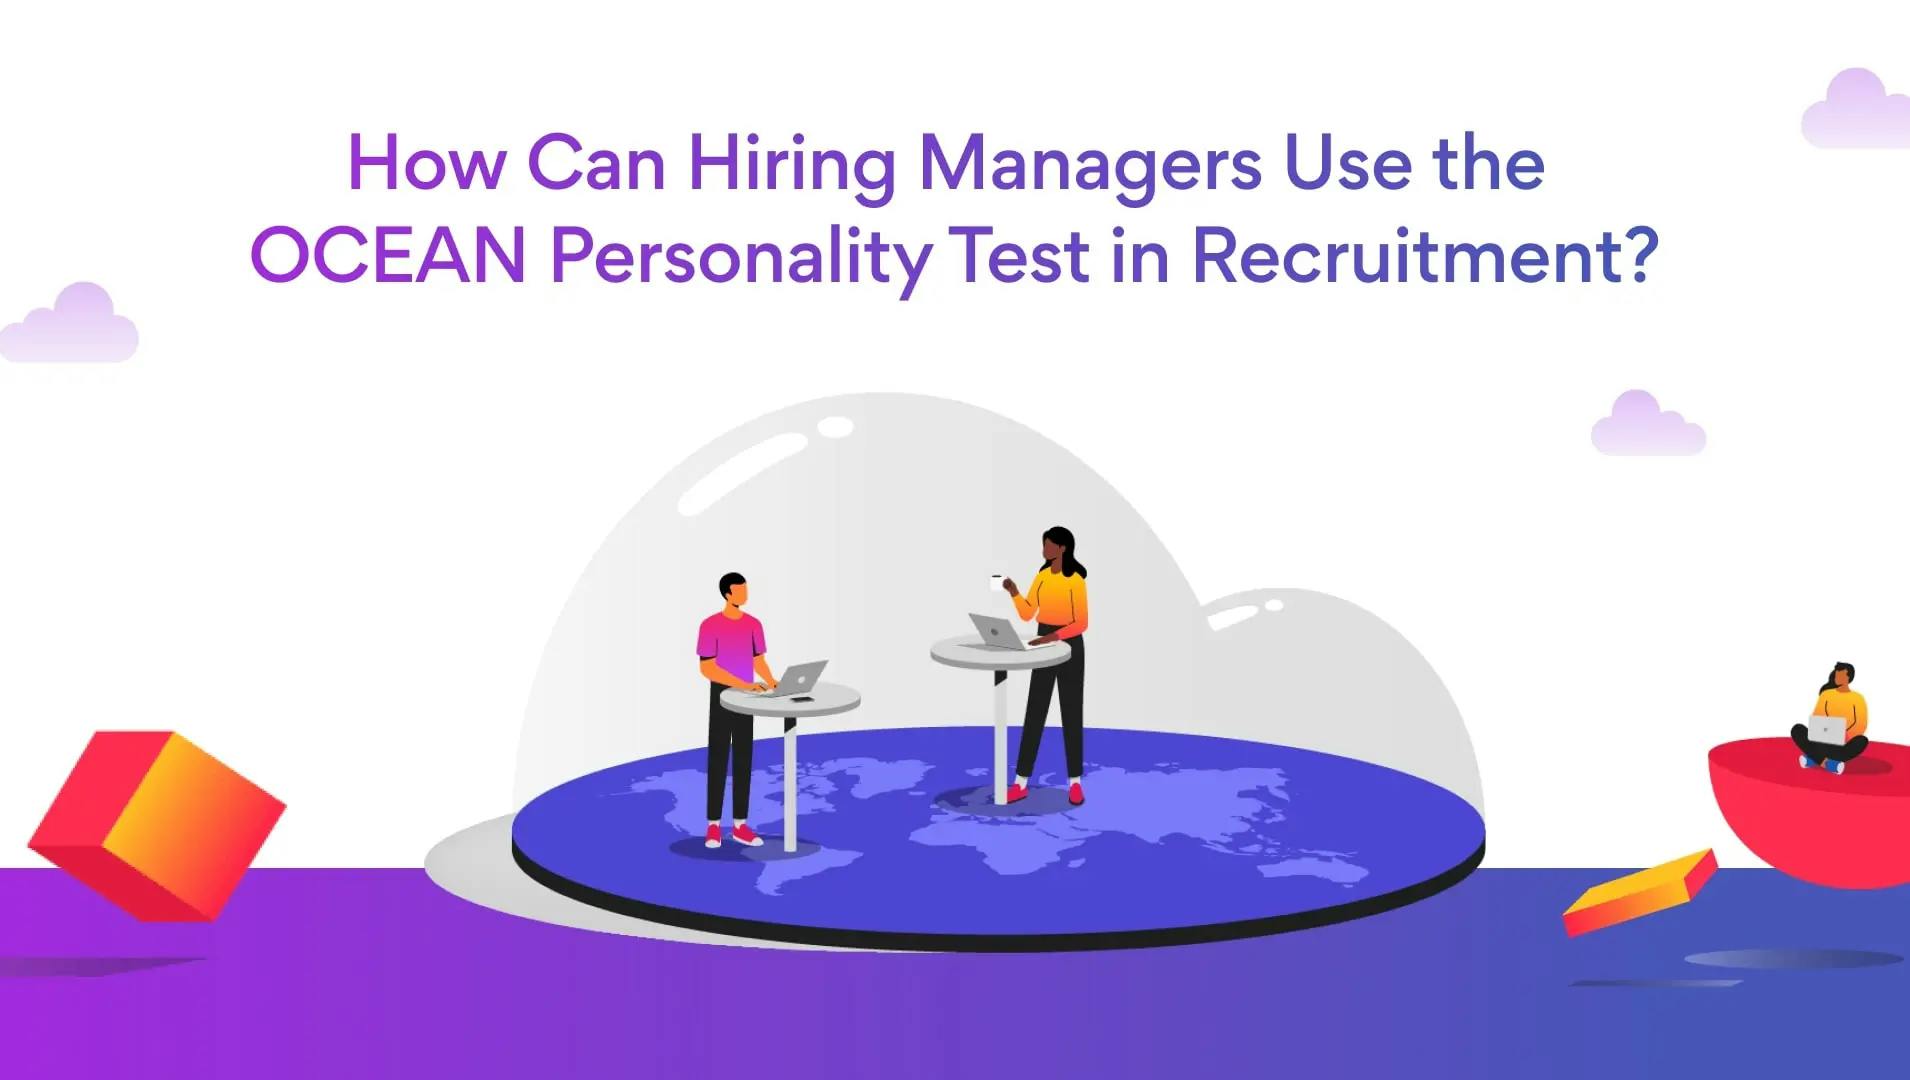 How Can Hiring Managers Use the OCEAN Personality Test in Recruitment?